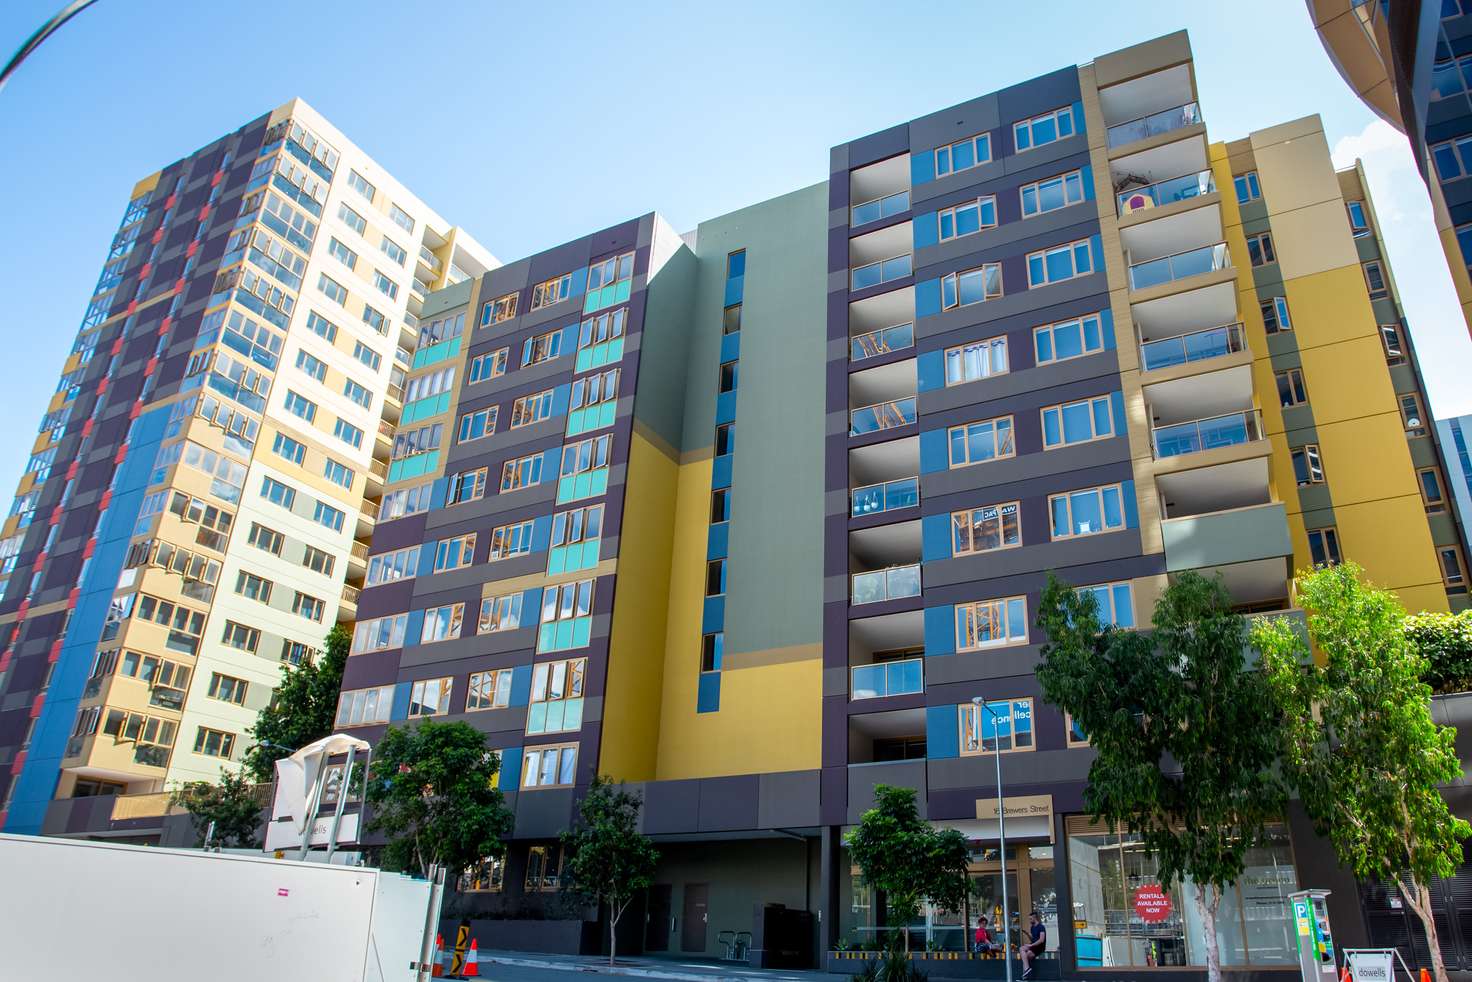 Main view of Homely apartment listing, 706/16 Brewers Street, Bowen Hills QLD 4006